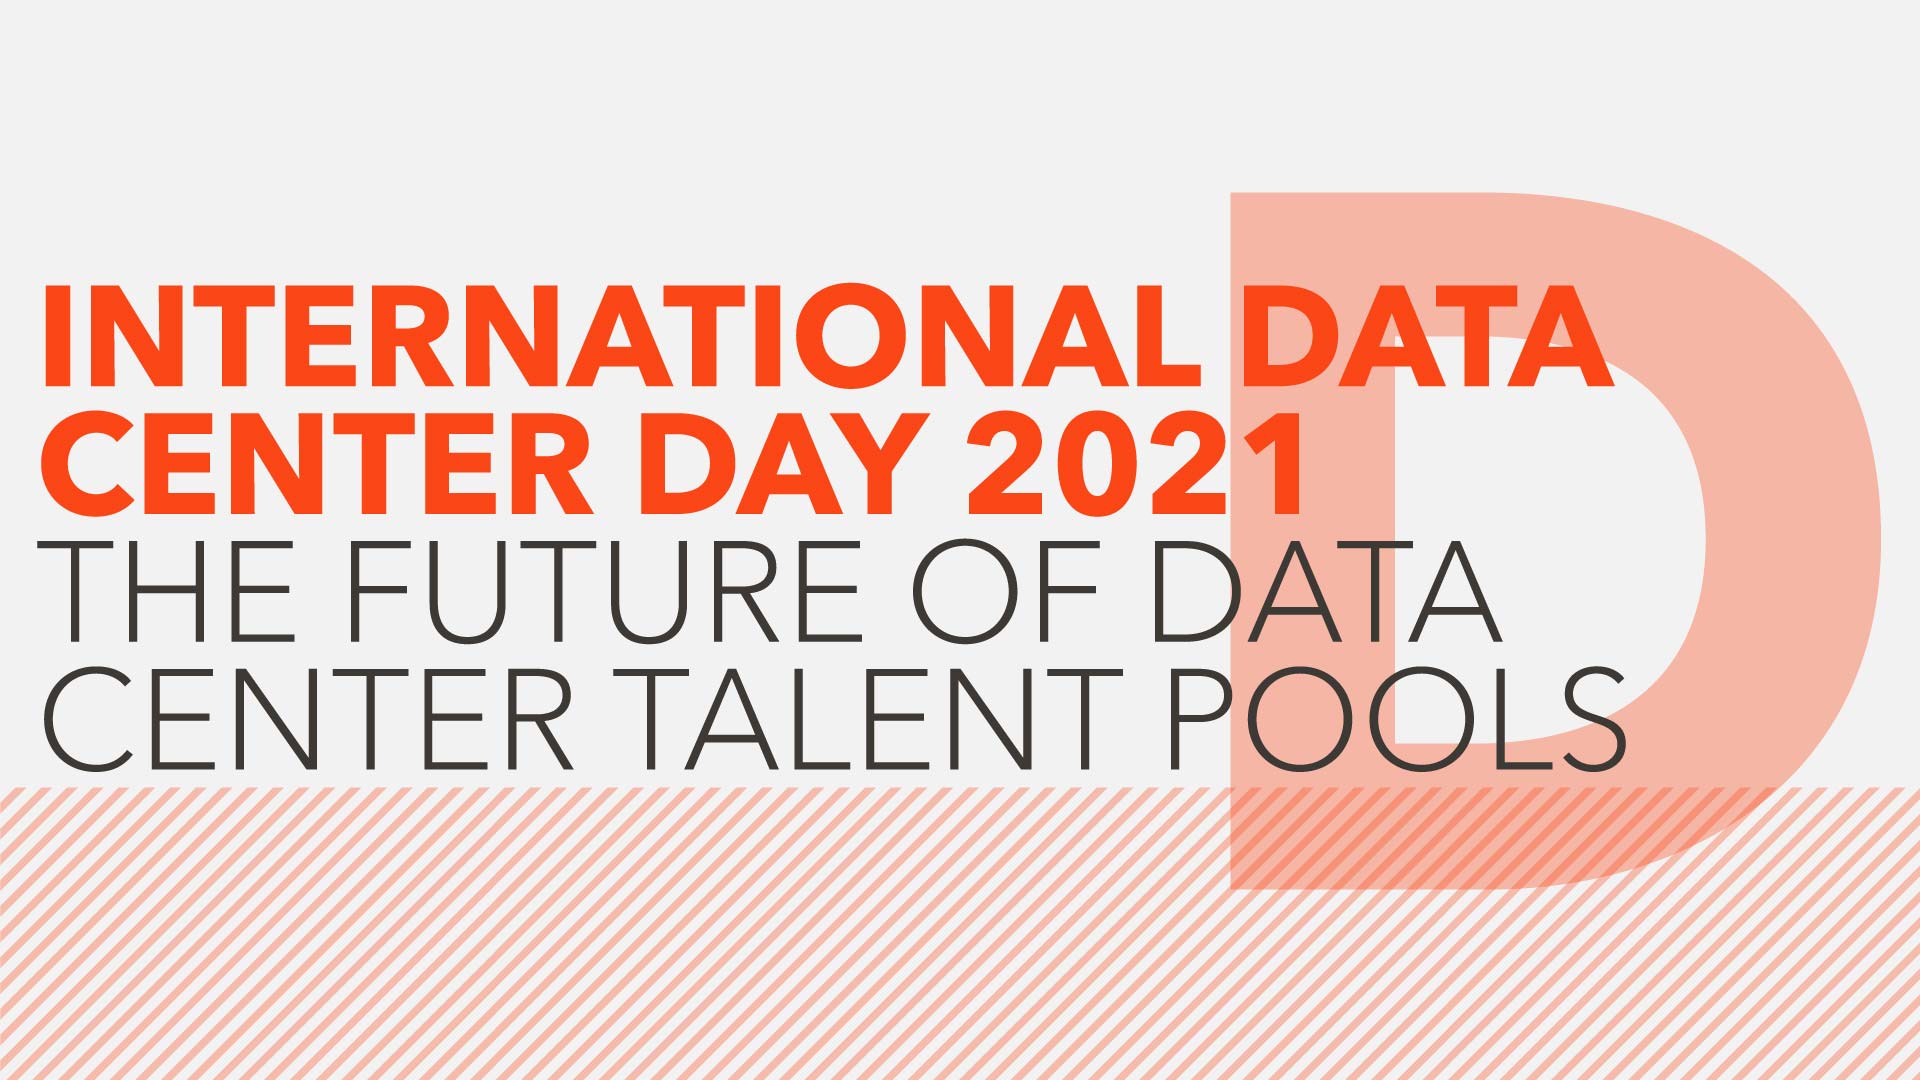 The future of data center talent pools